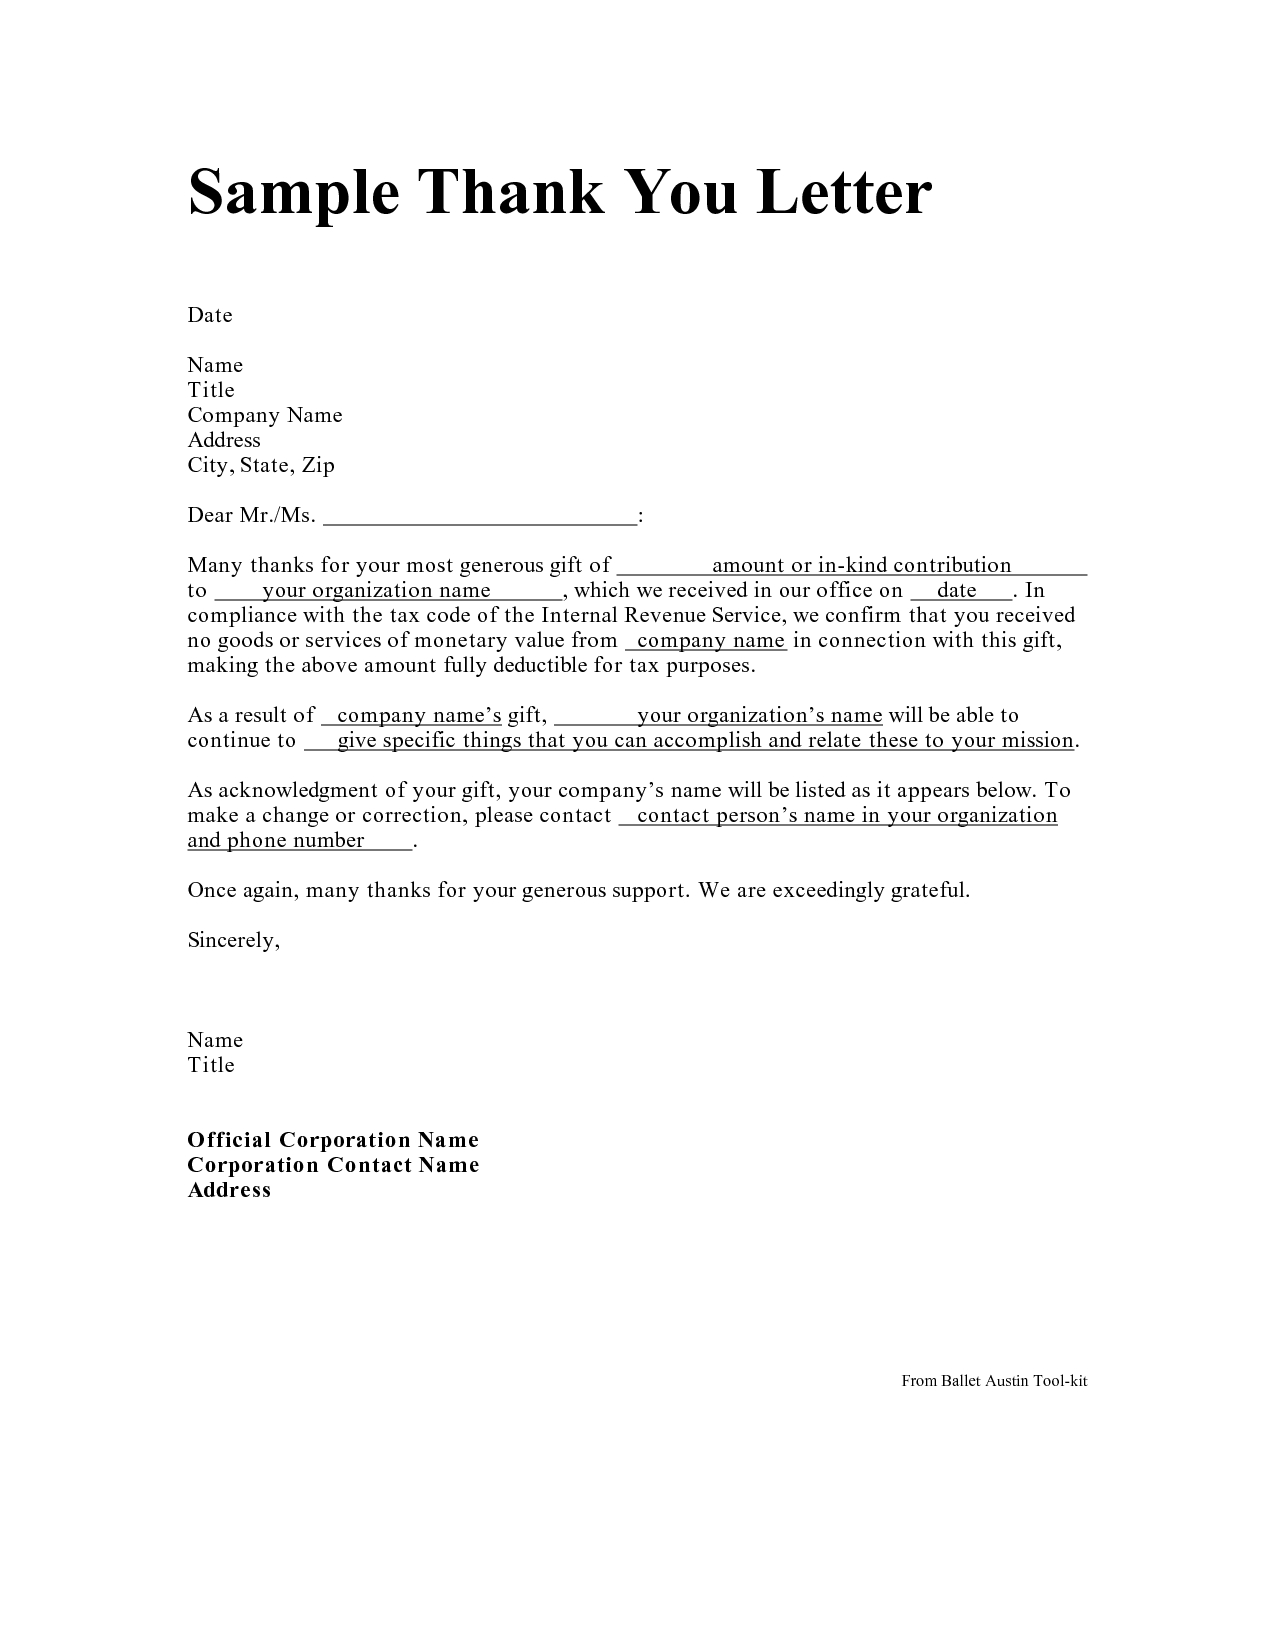 Will Serve Letter Template - Personal Thank You Letter Personal Thank You Letter Samples